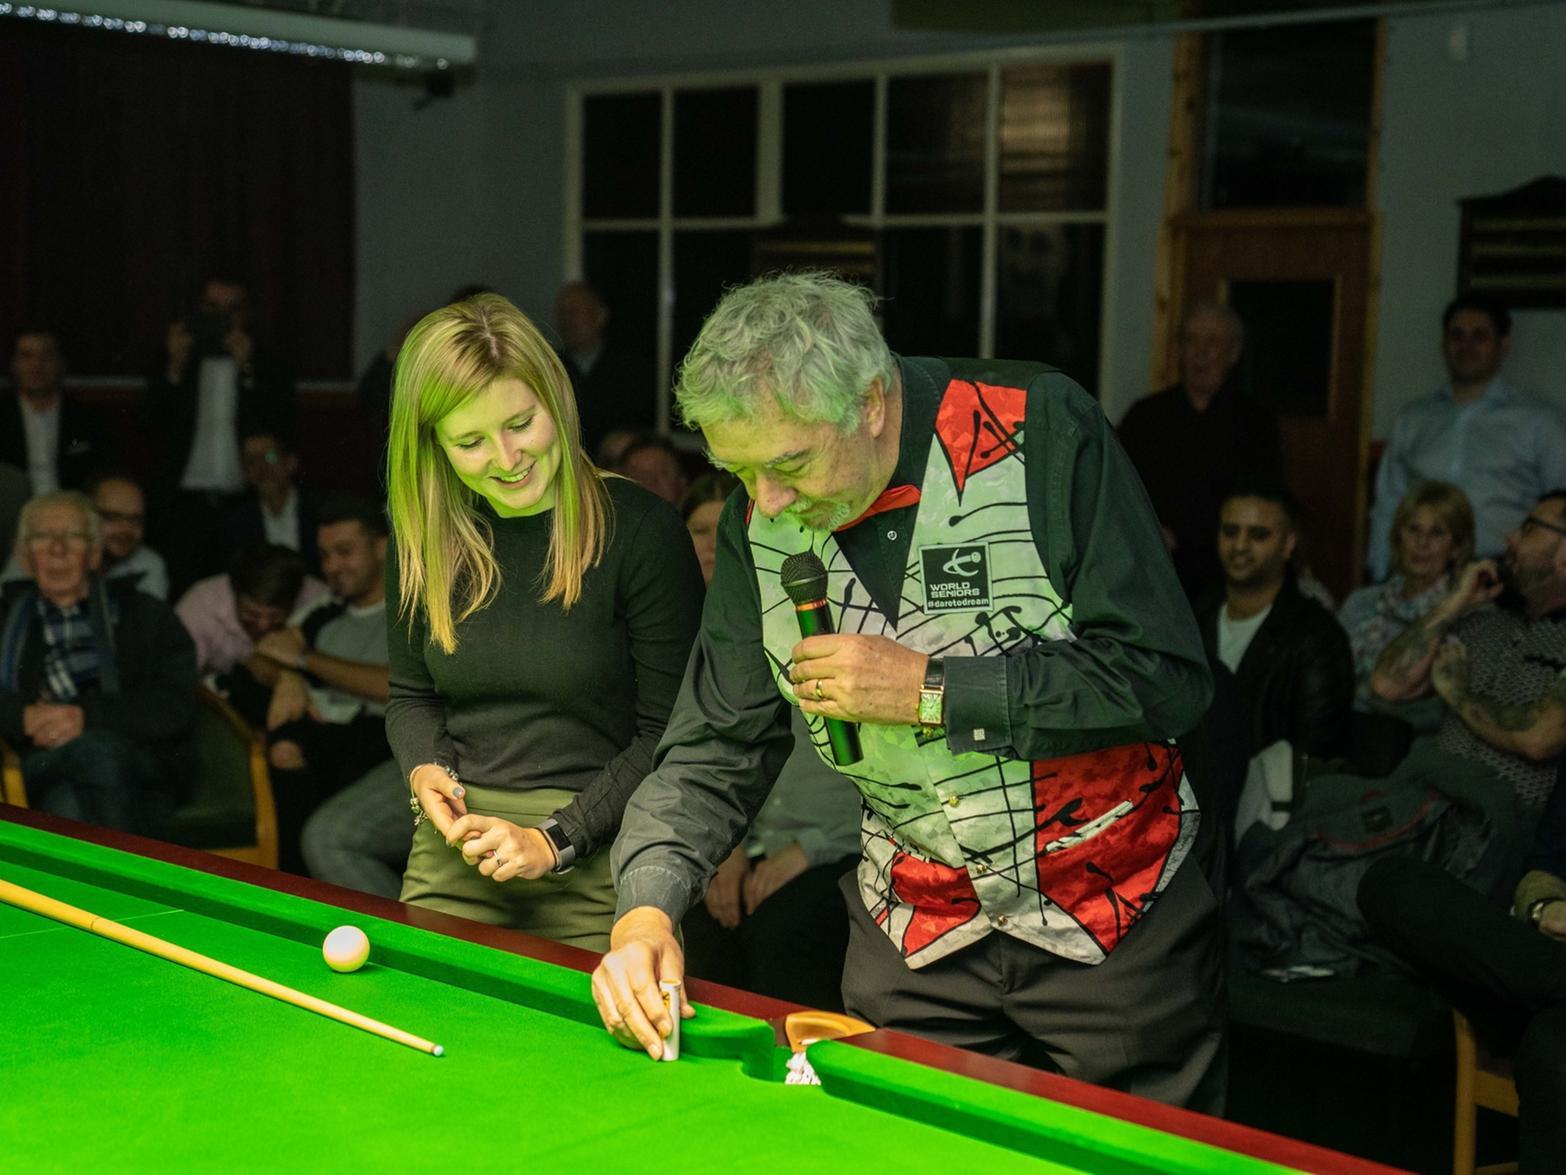 John Virgo called on the audience to help out with his trick shots